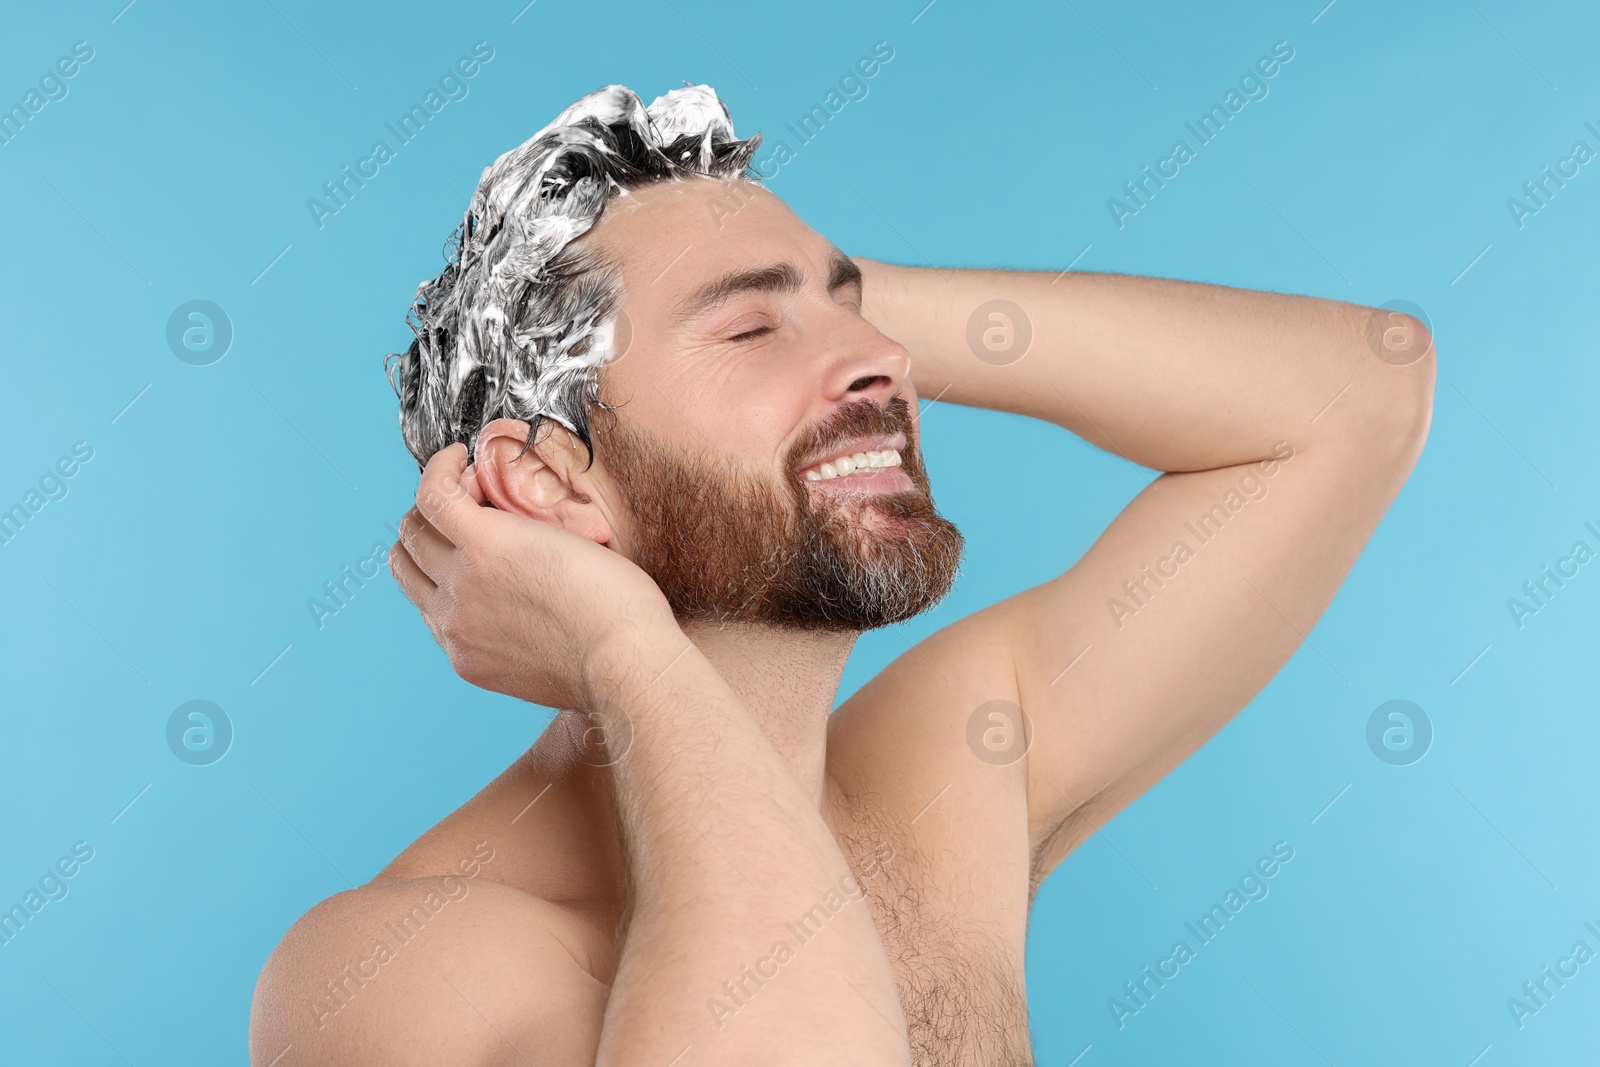 Photo of Happy man washing his hair with shampoo on light blue background, closeup